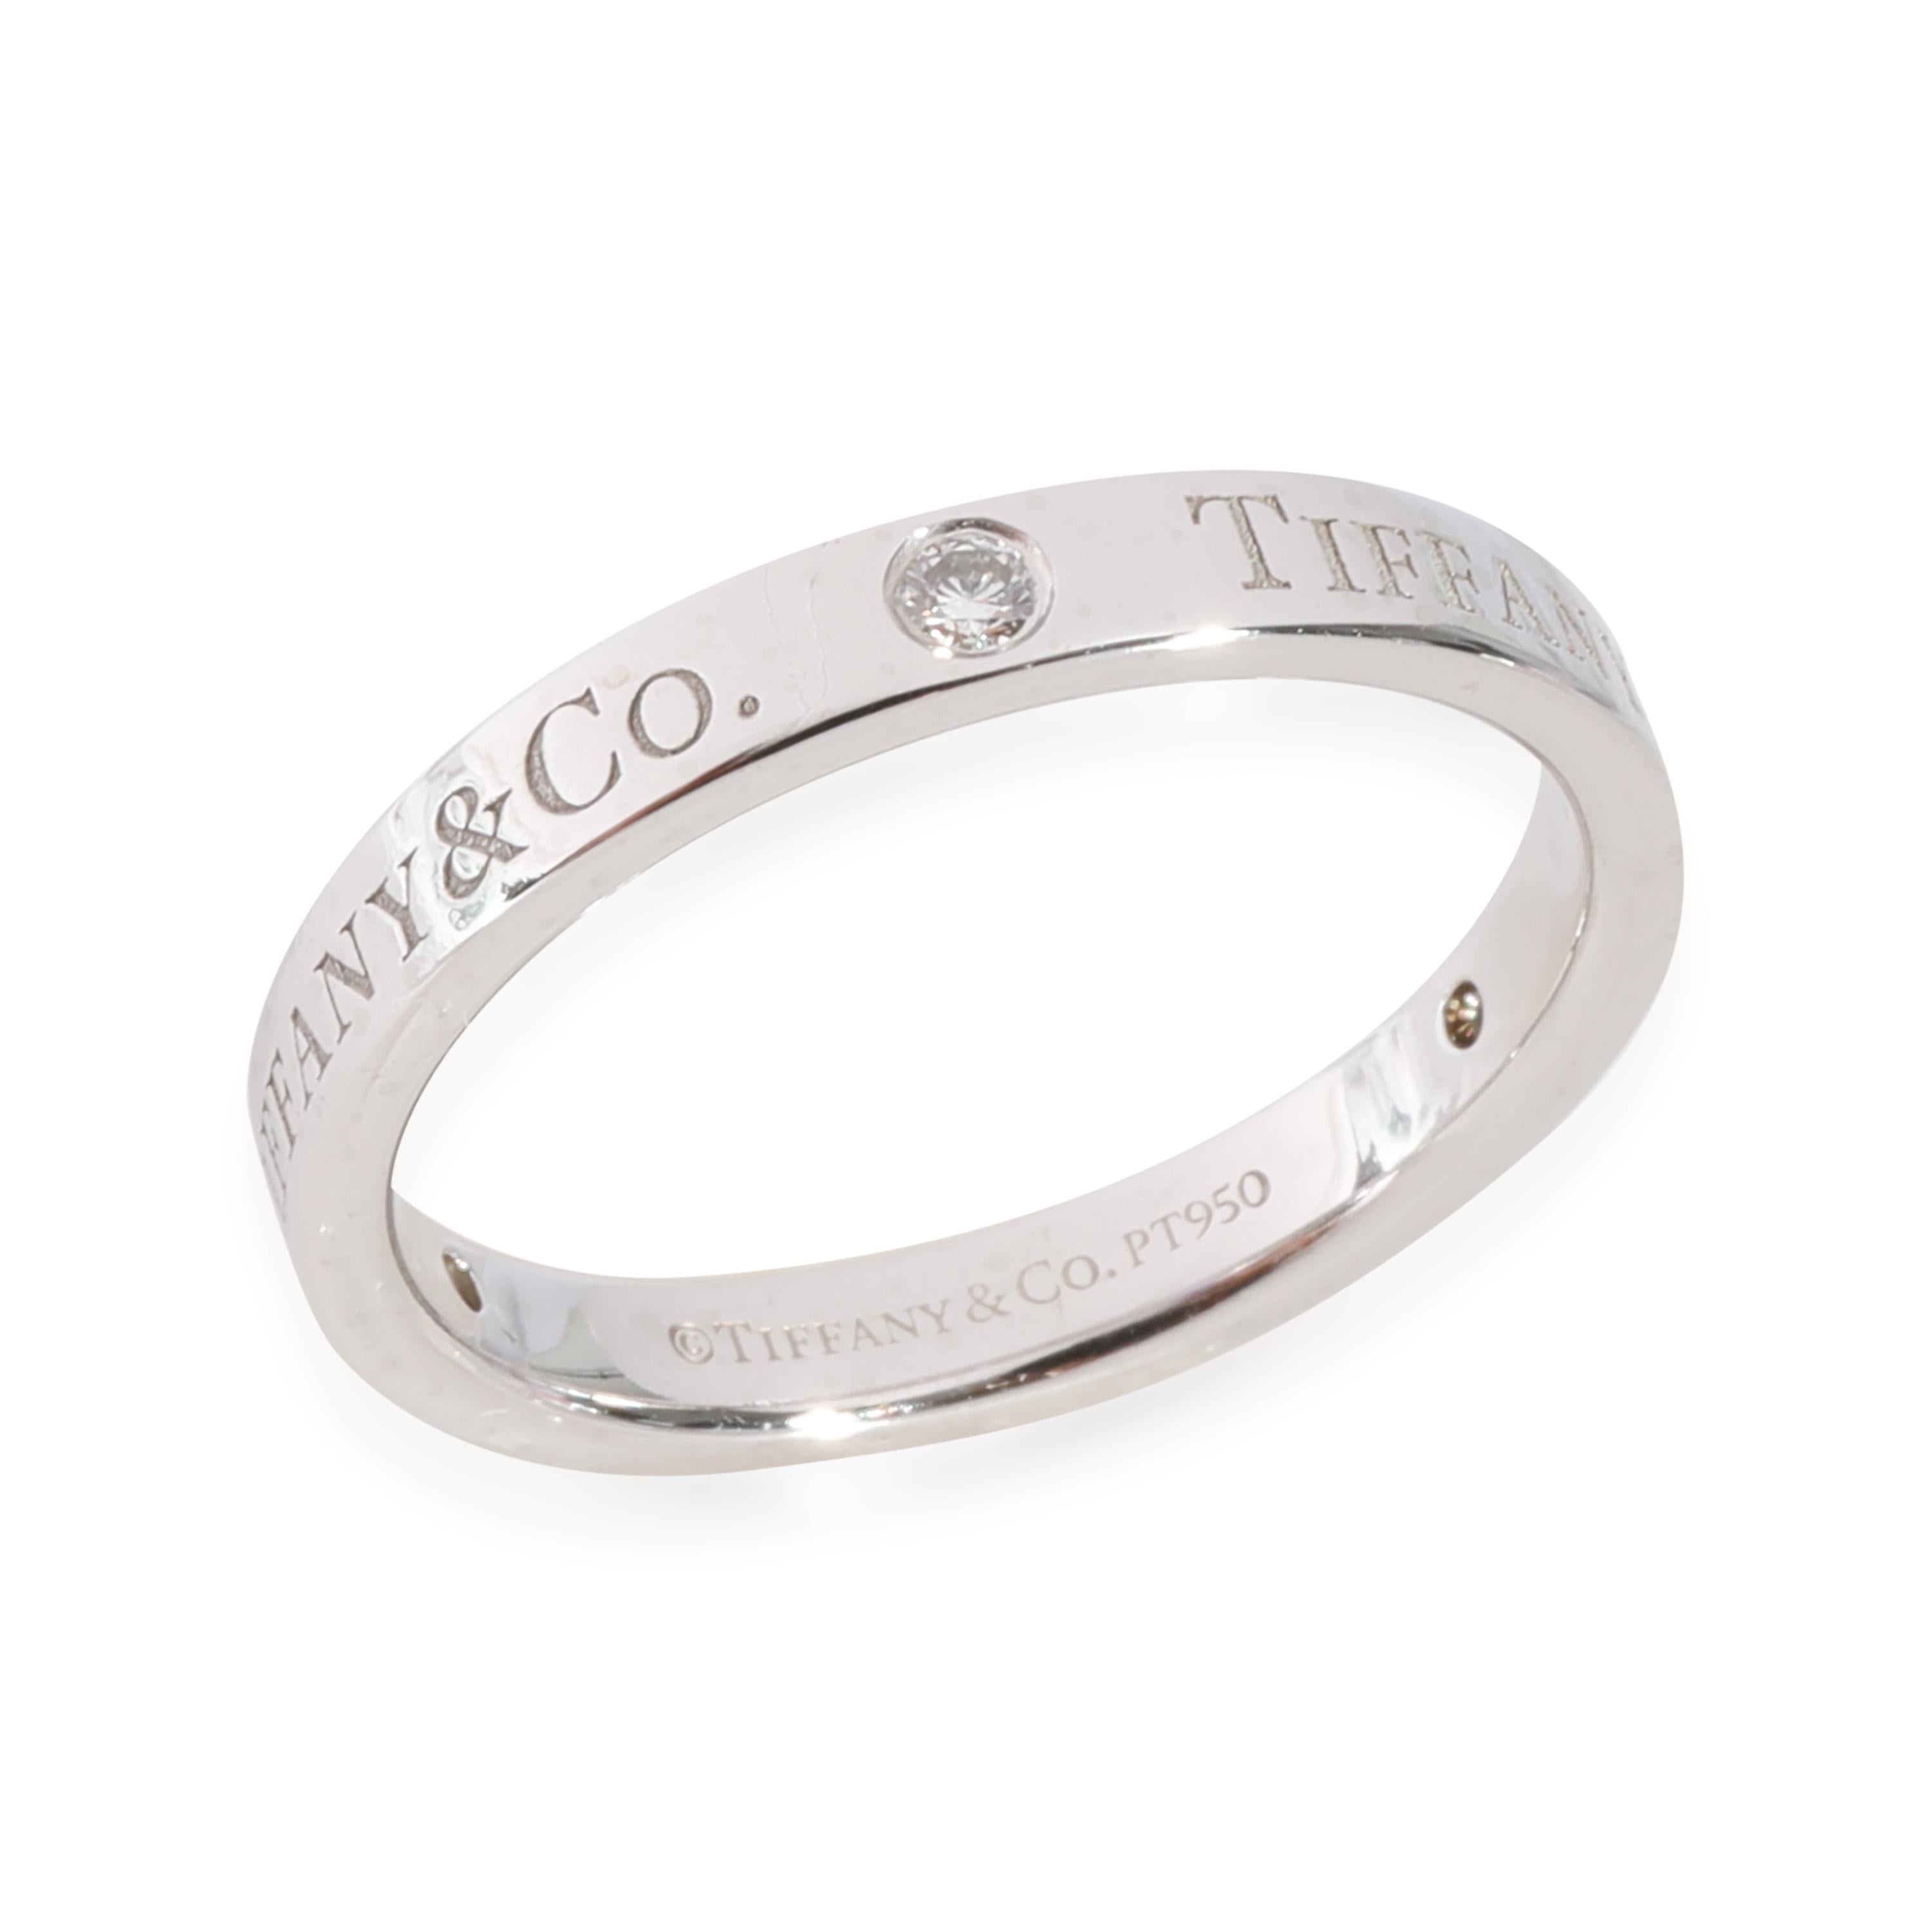 Tiffany & Co. Diamond Band in 950 Platinum 0.07 CTW

PRIMARY DETAILS
SKU: 125350
Listing Title: Tiffany & Co. Diamond Band in 950 Platinum 0.07 CTW
Condition Description: Retails for 1900 USD. In excellent condition and recently polished. Ring size